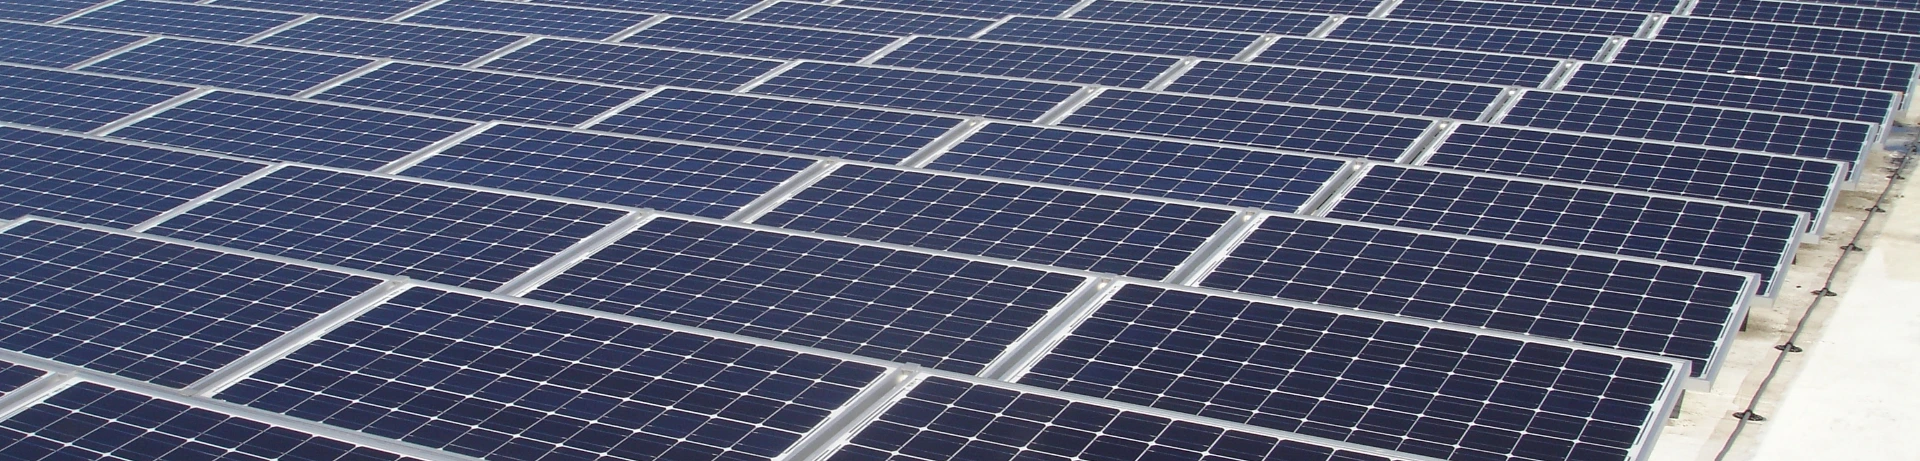 An array of solar panels on a commercial roof.